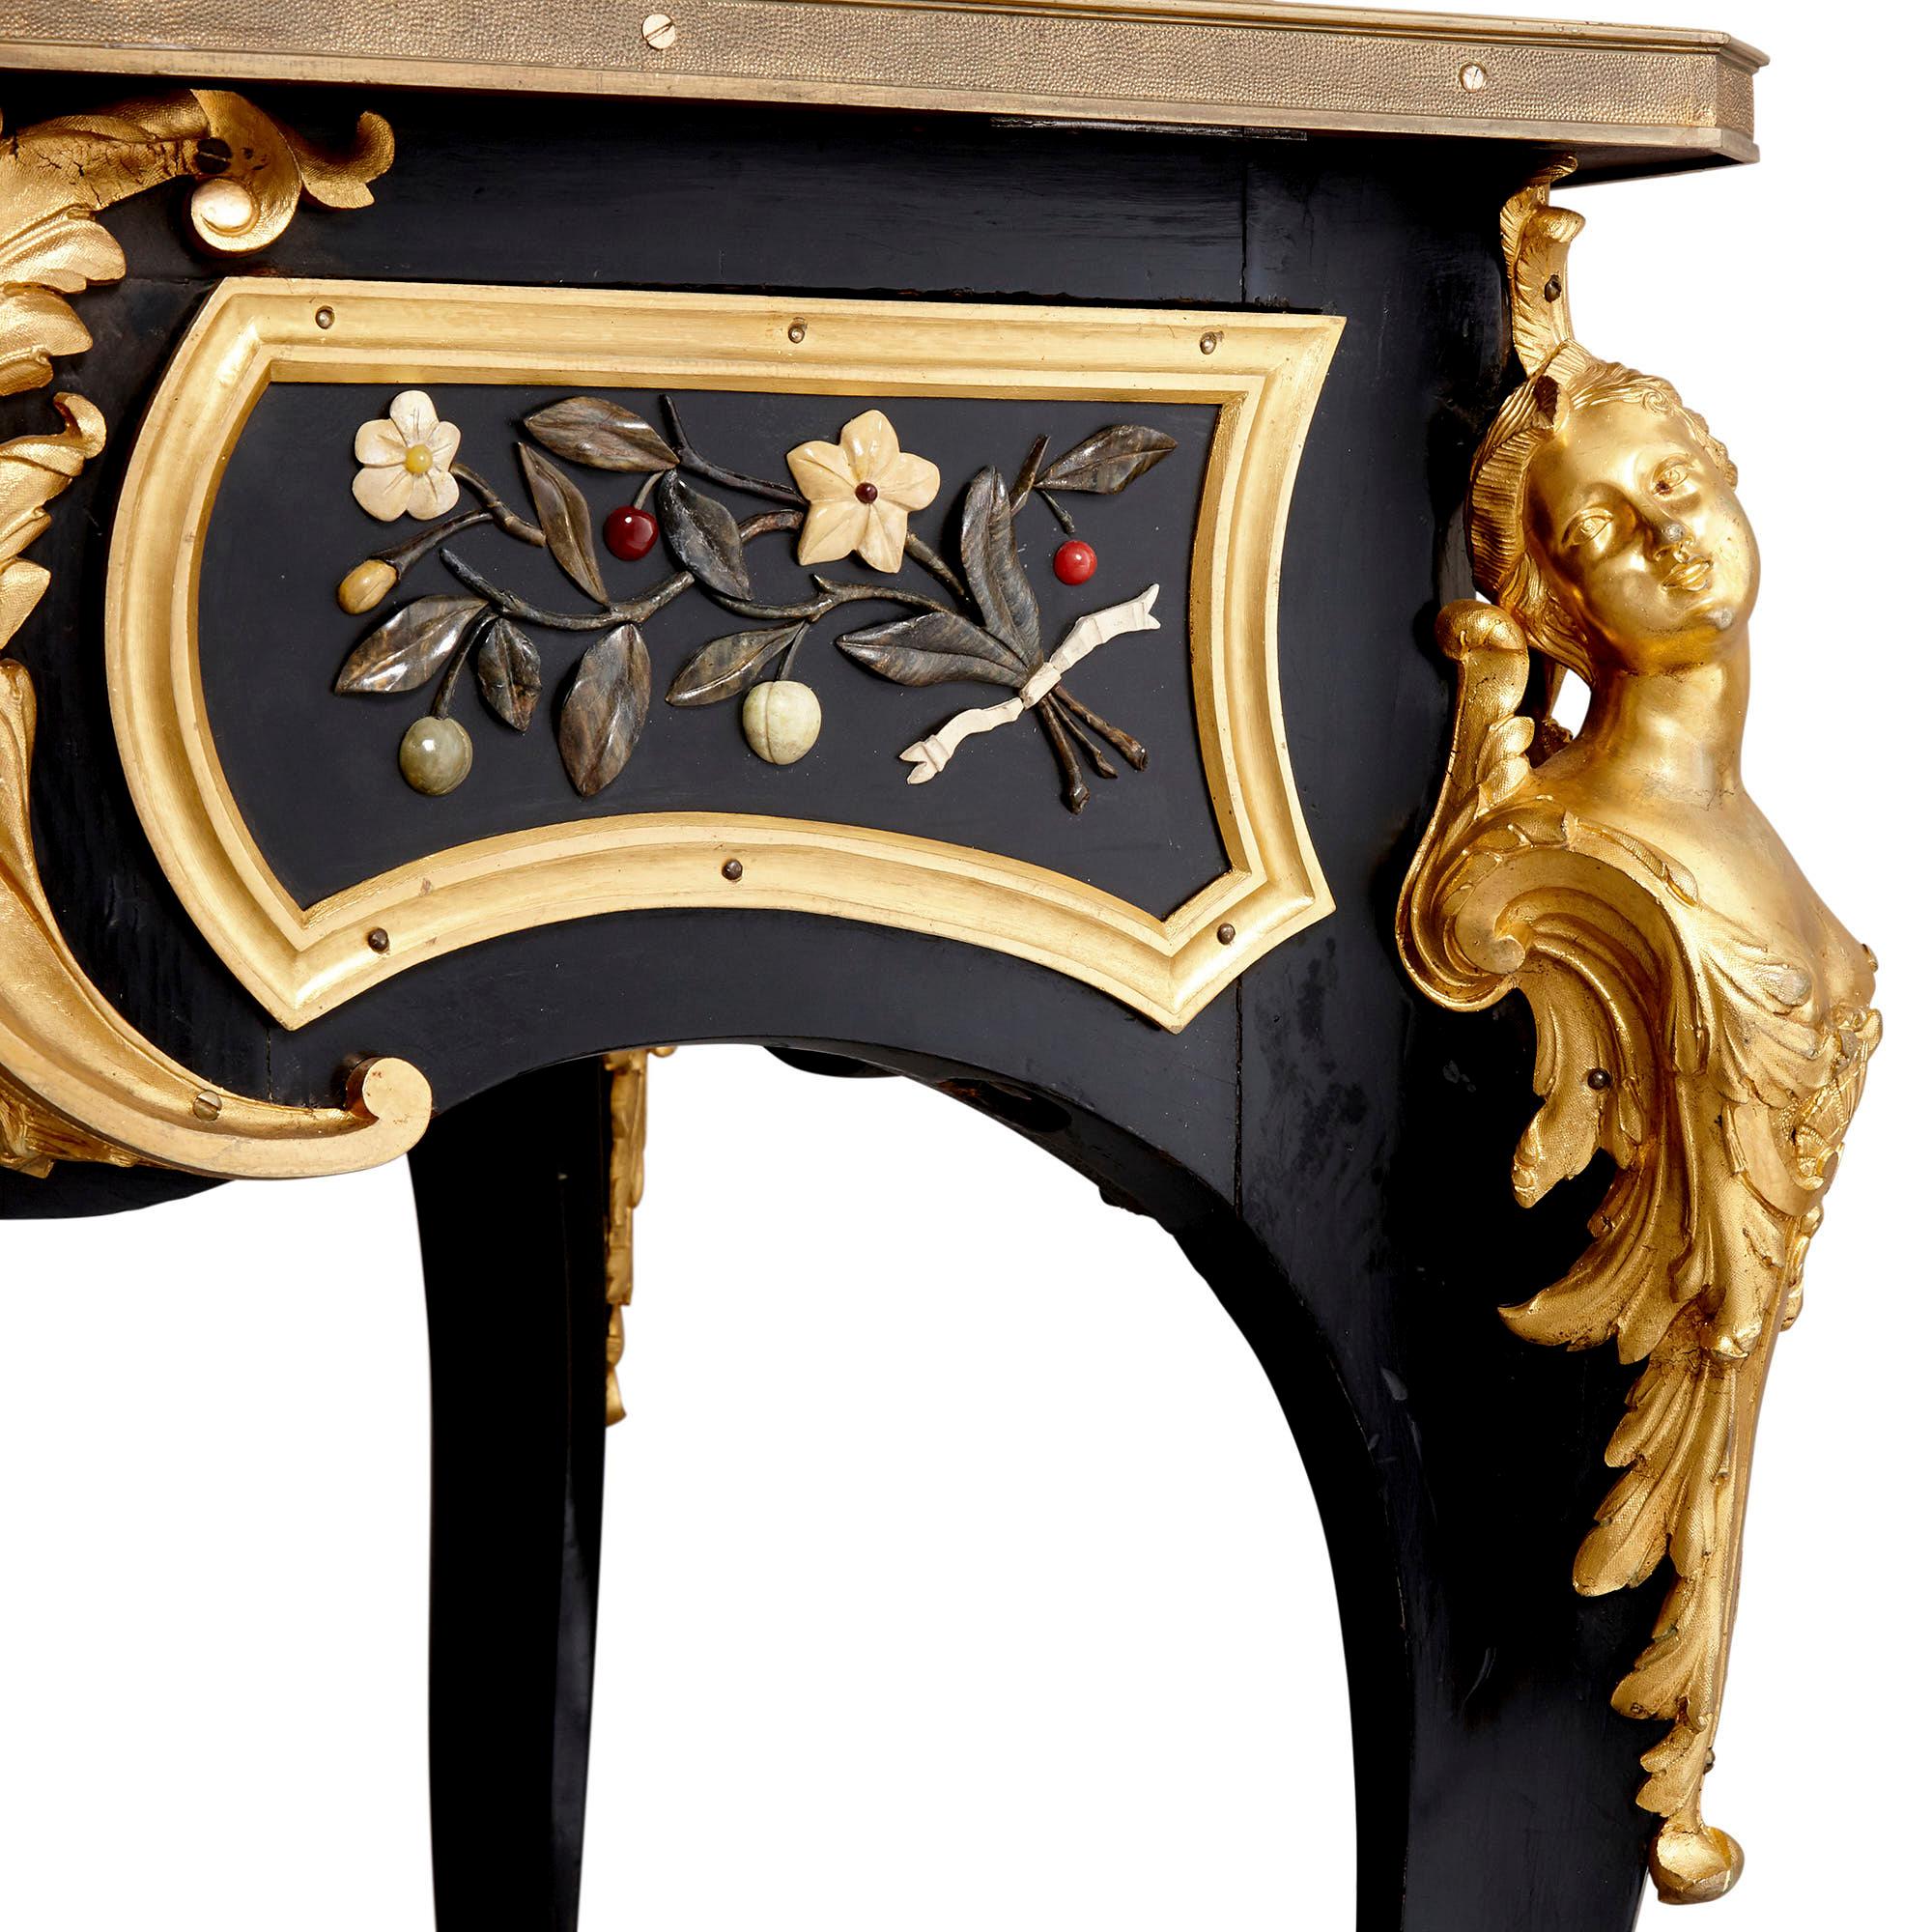 Antique Mid-19th Century Ebonised Wood, Gilt Bronze and Pietra Dura Desk In Good Condition For Sale In London, GB